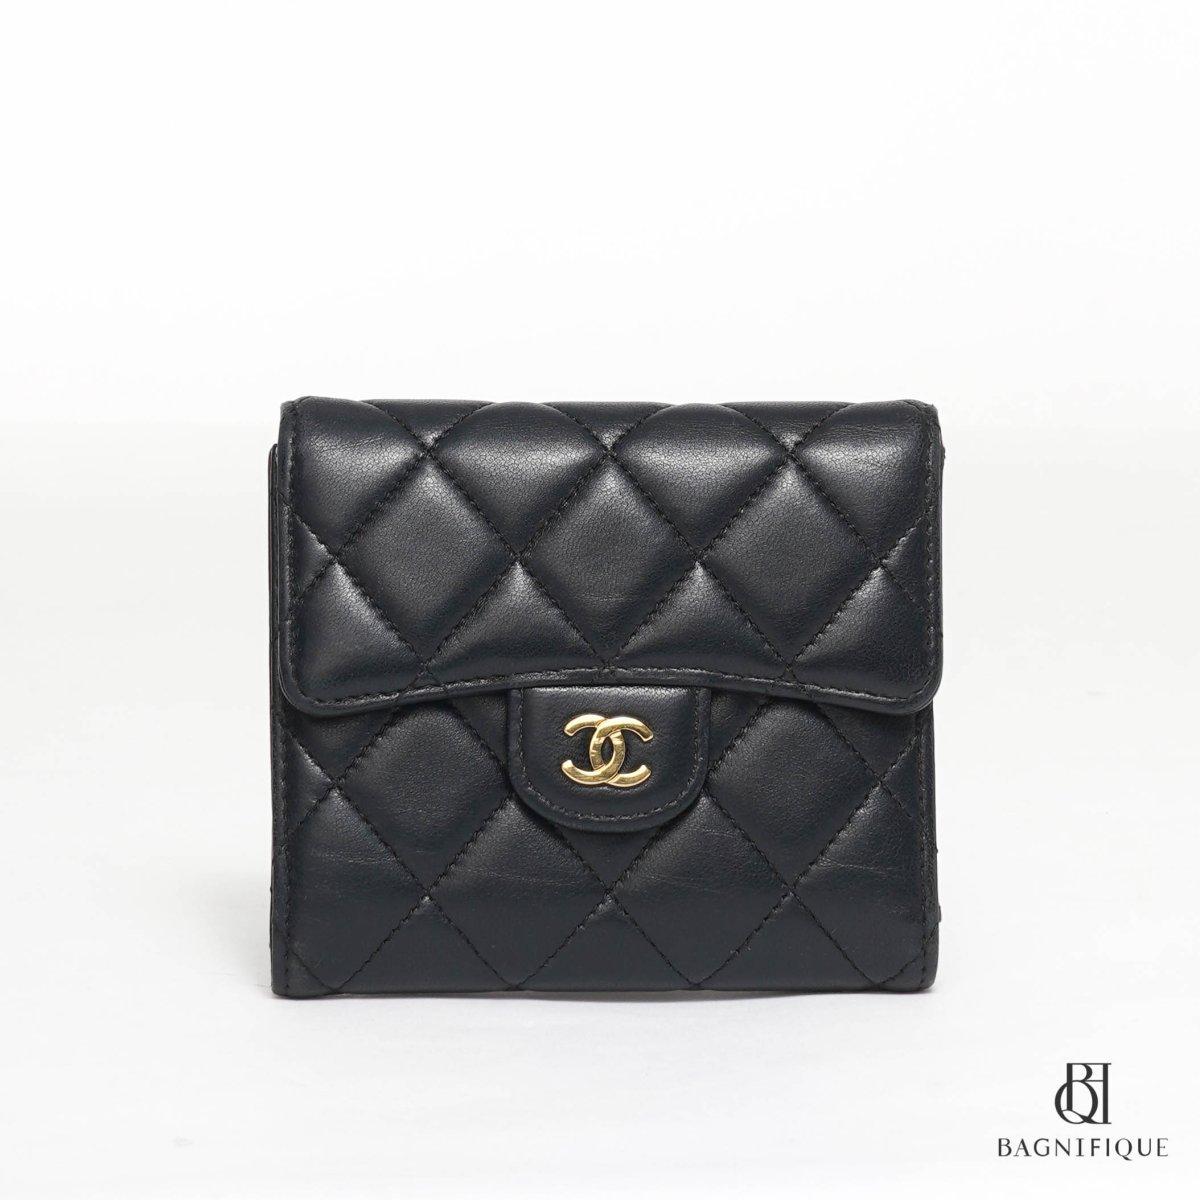 CHANEL Boy Chanel TriFold Wallet Black A84432 Caviar Leather GALLERY RARE  Global Online Store